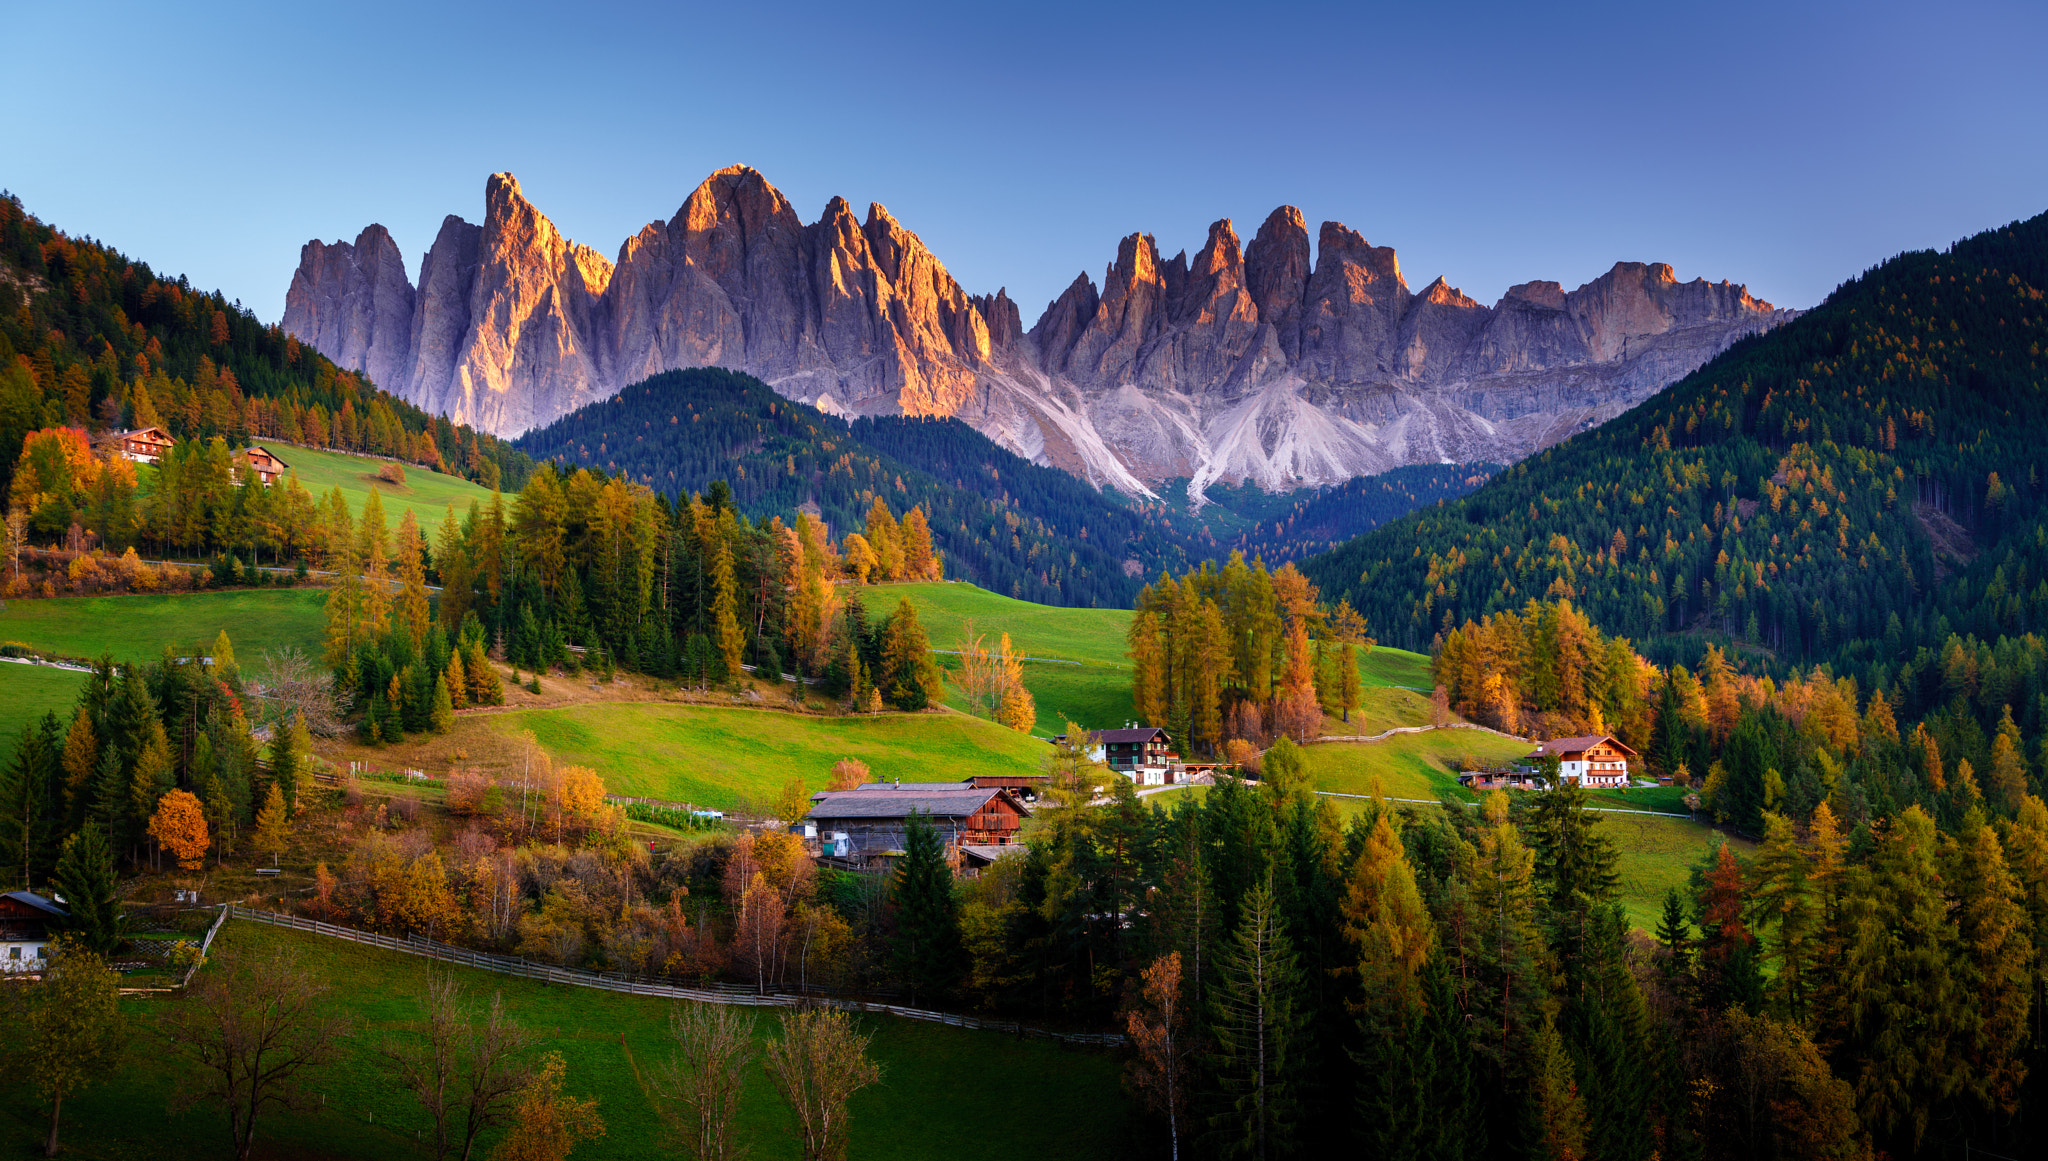 Wallpaper Full HD photography, landscape, dolomites, fall, forest, italy, mountain